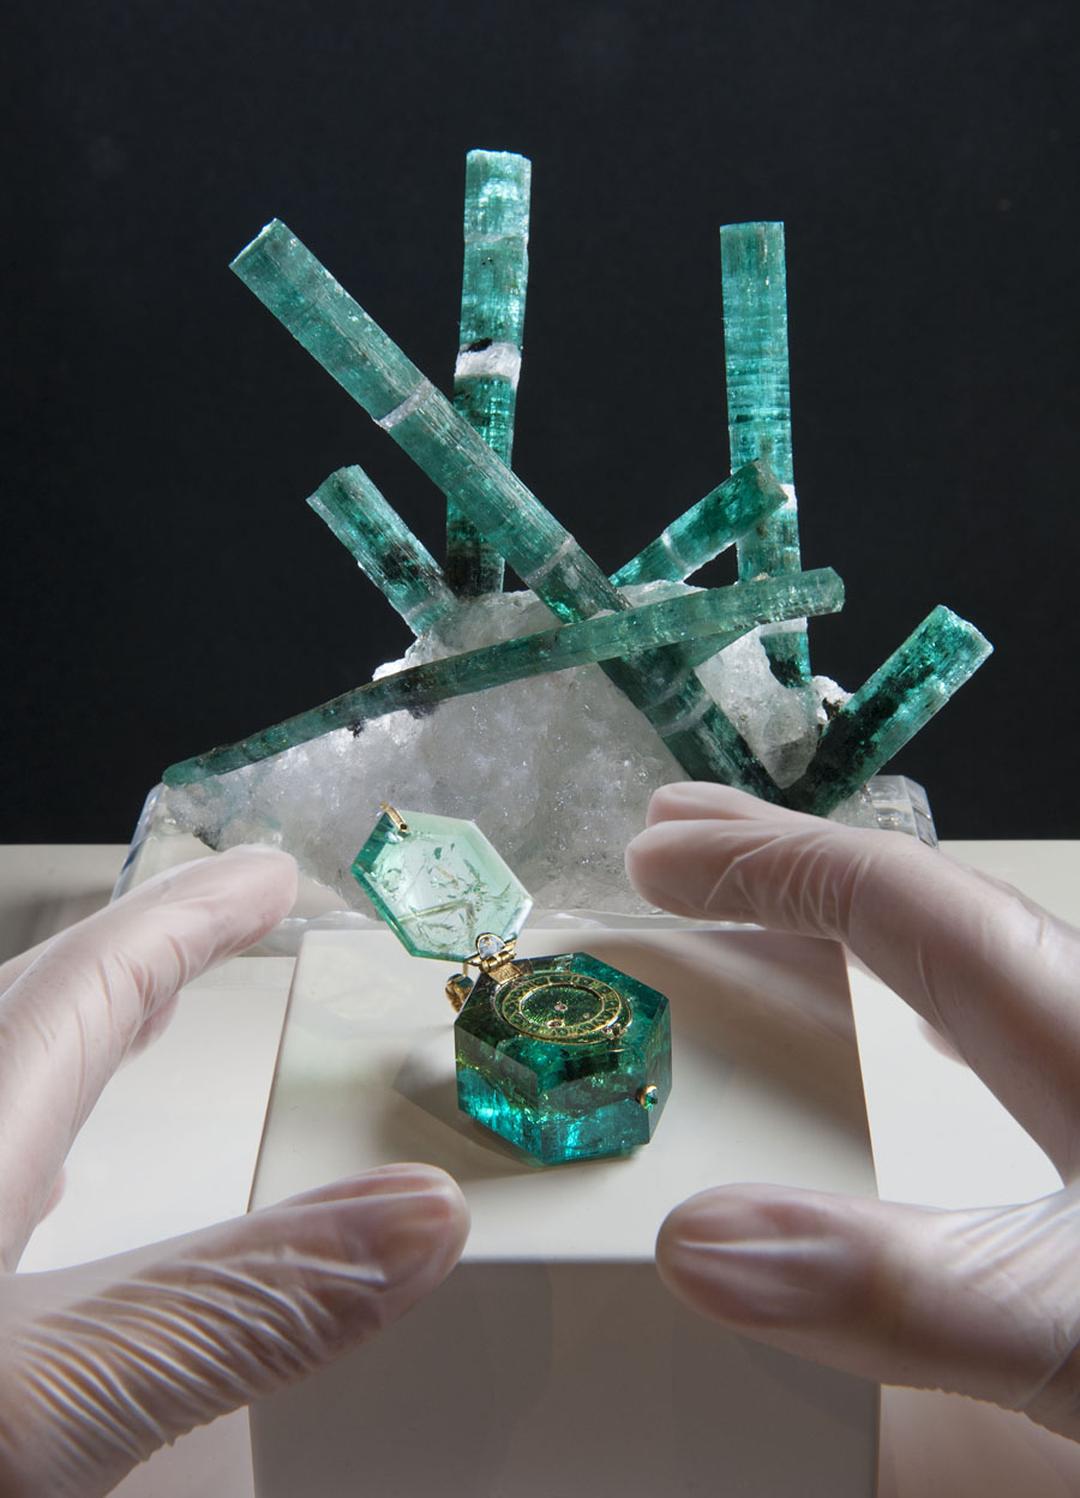 A spectacular hexagonal emerald watch, which dates from 1600s England. Displayed in the London Museum, with the remarkable 'Medusa Enerald' from Zambia.